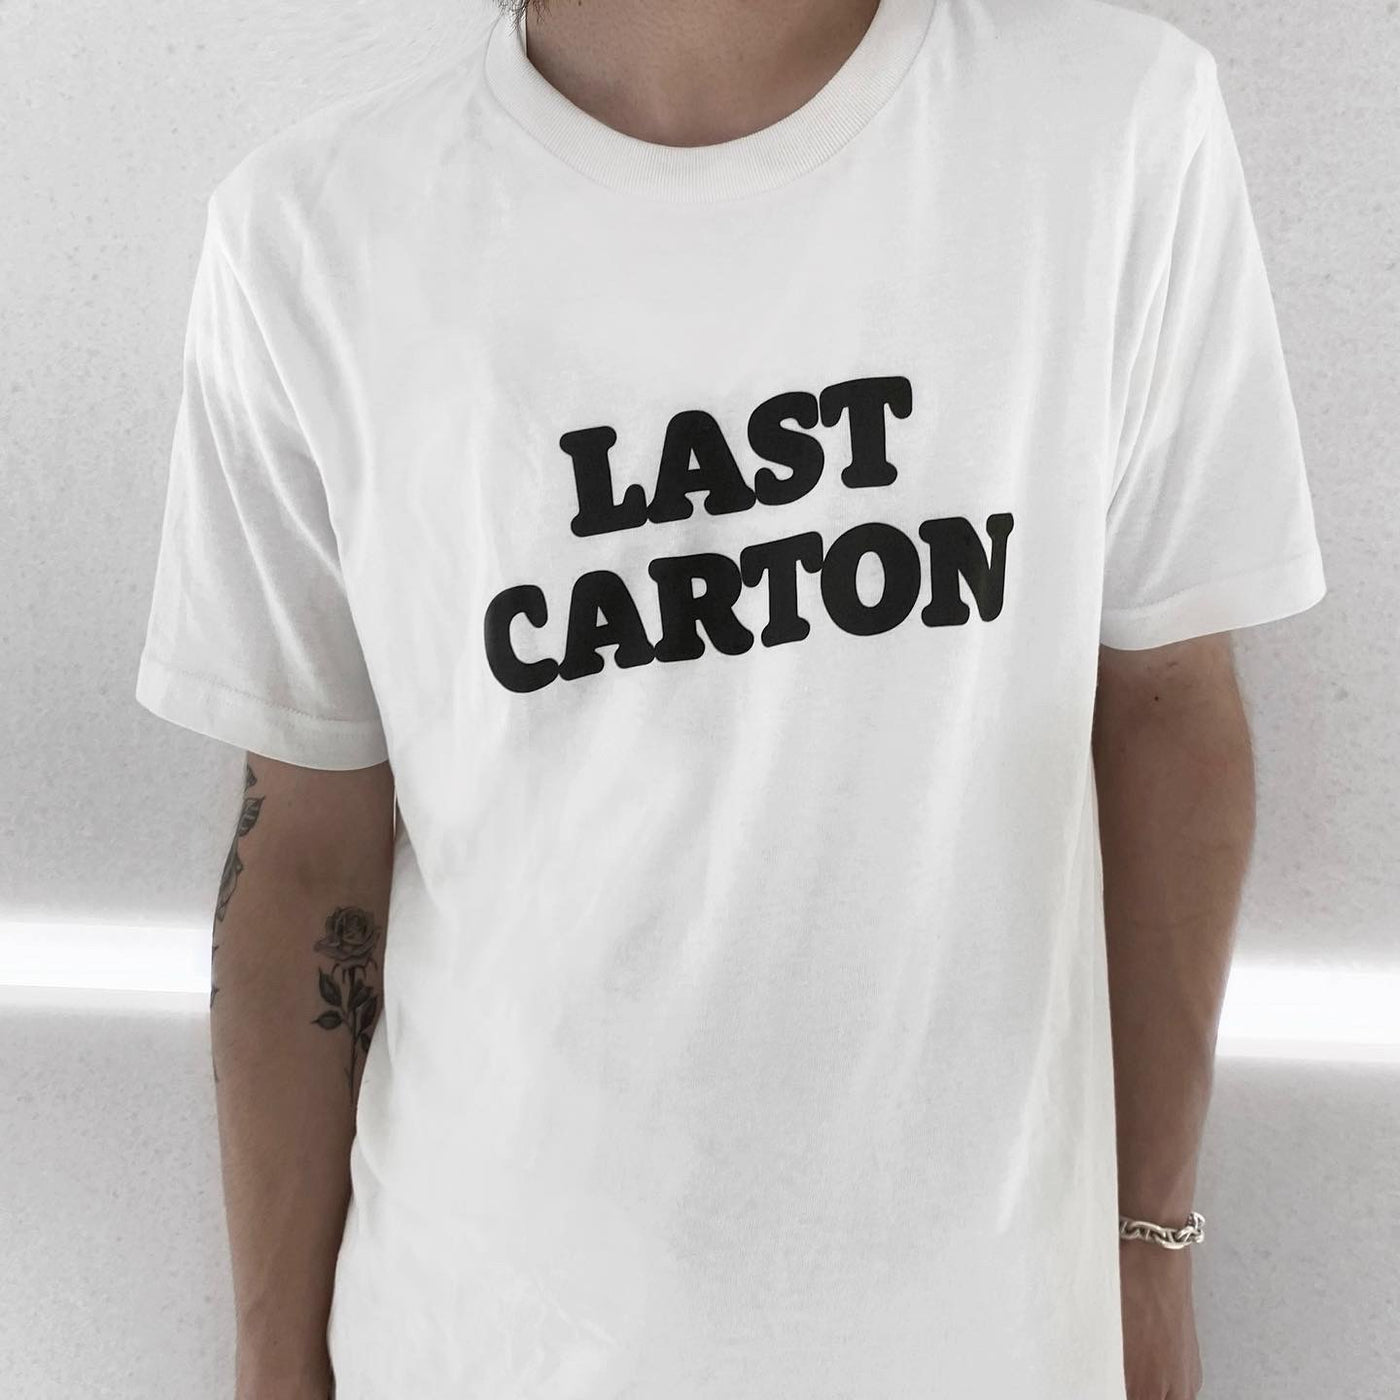 [Instant delivery]"Last Carton"T-shirt (white)